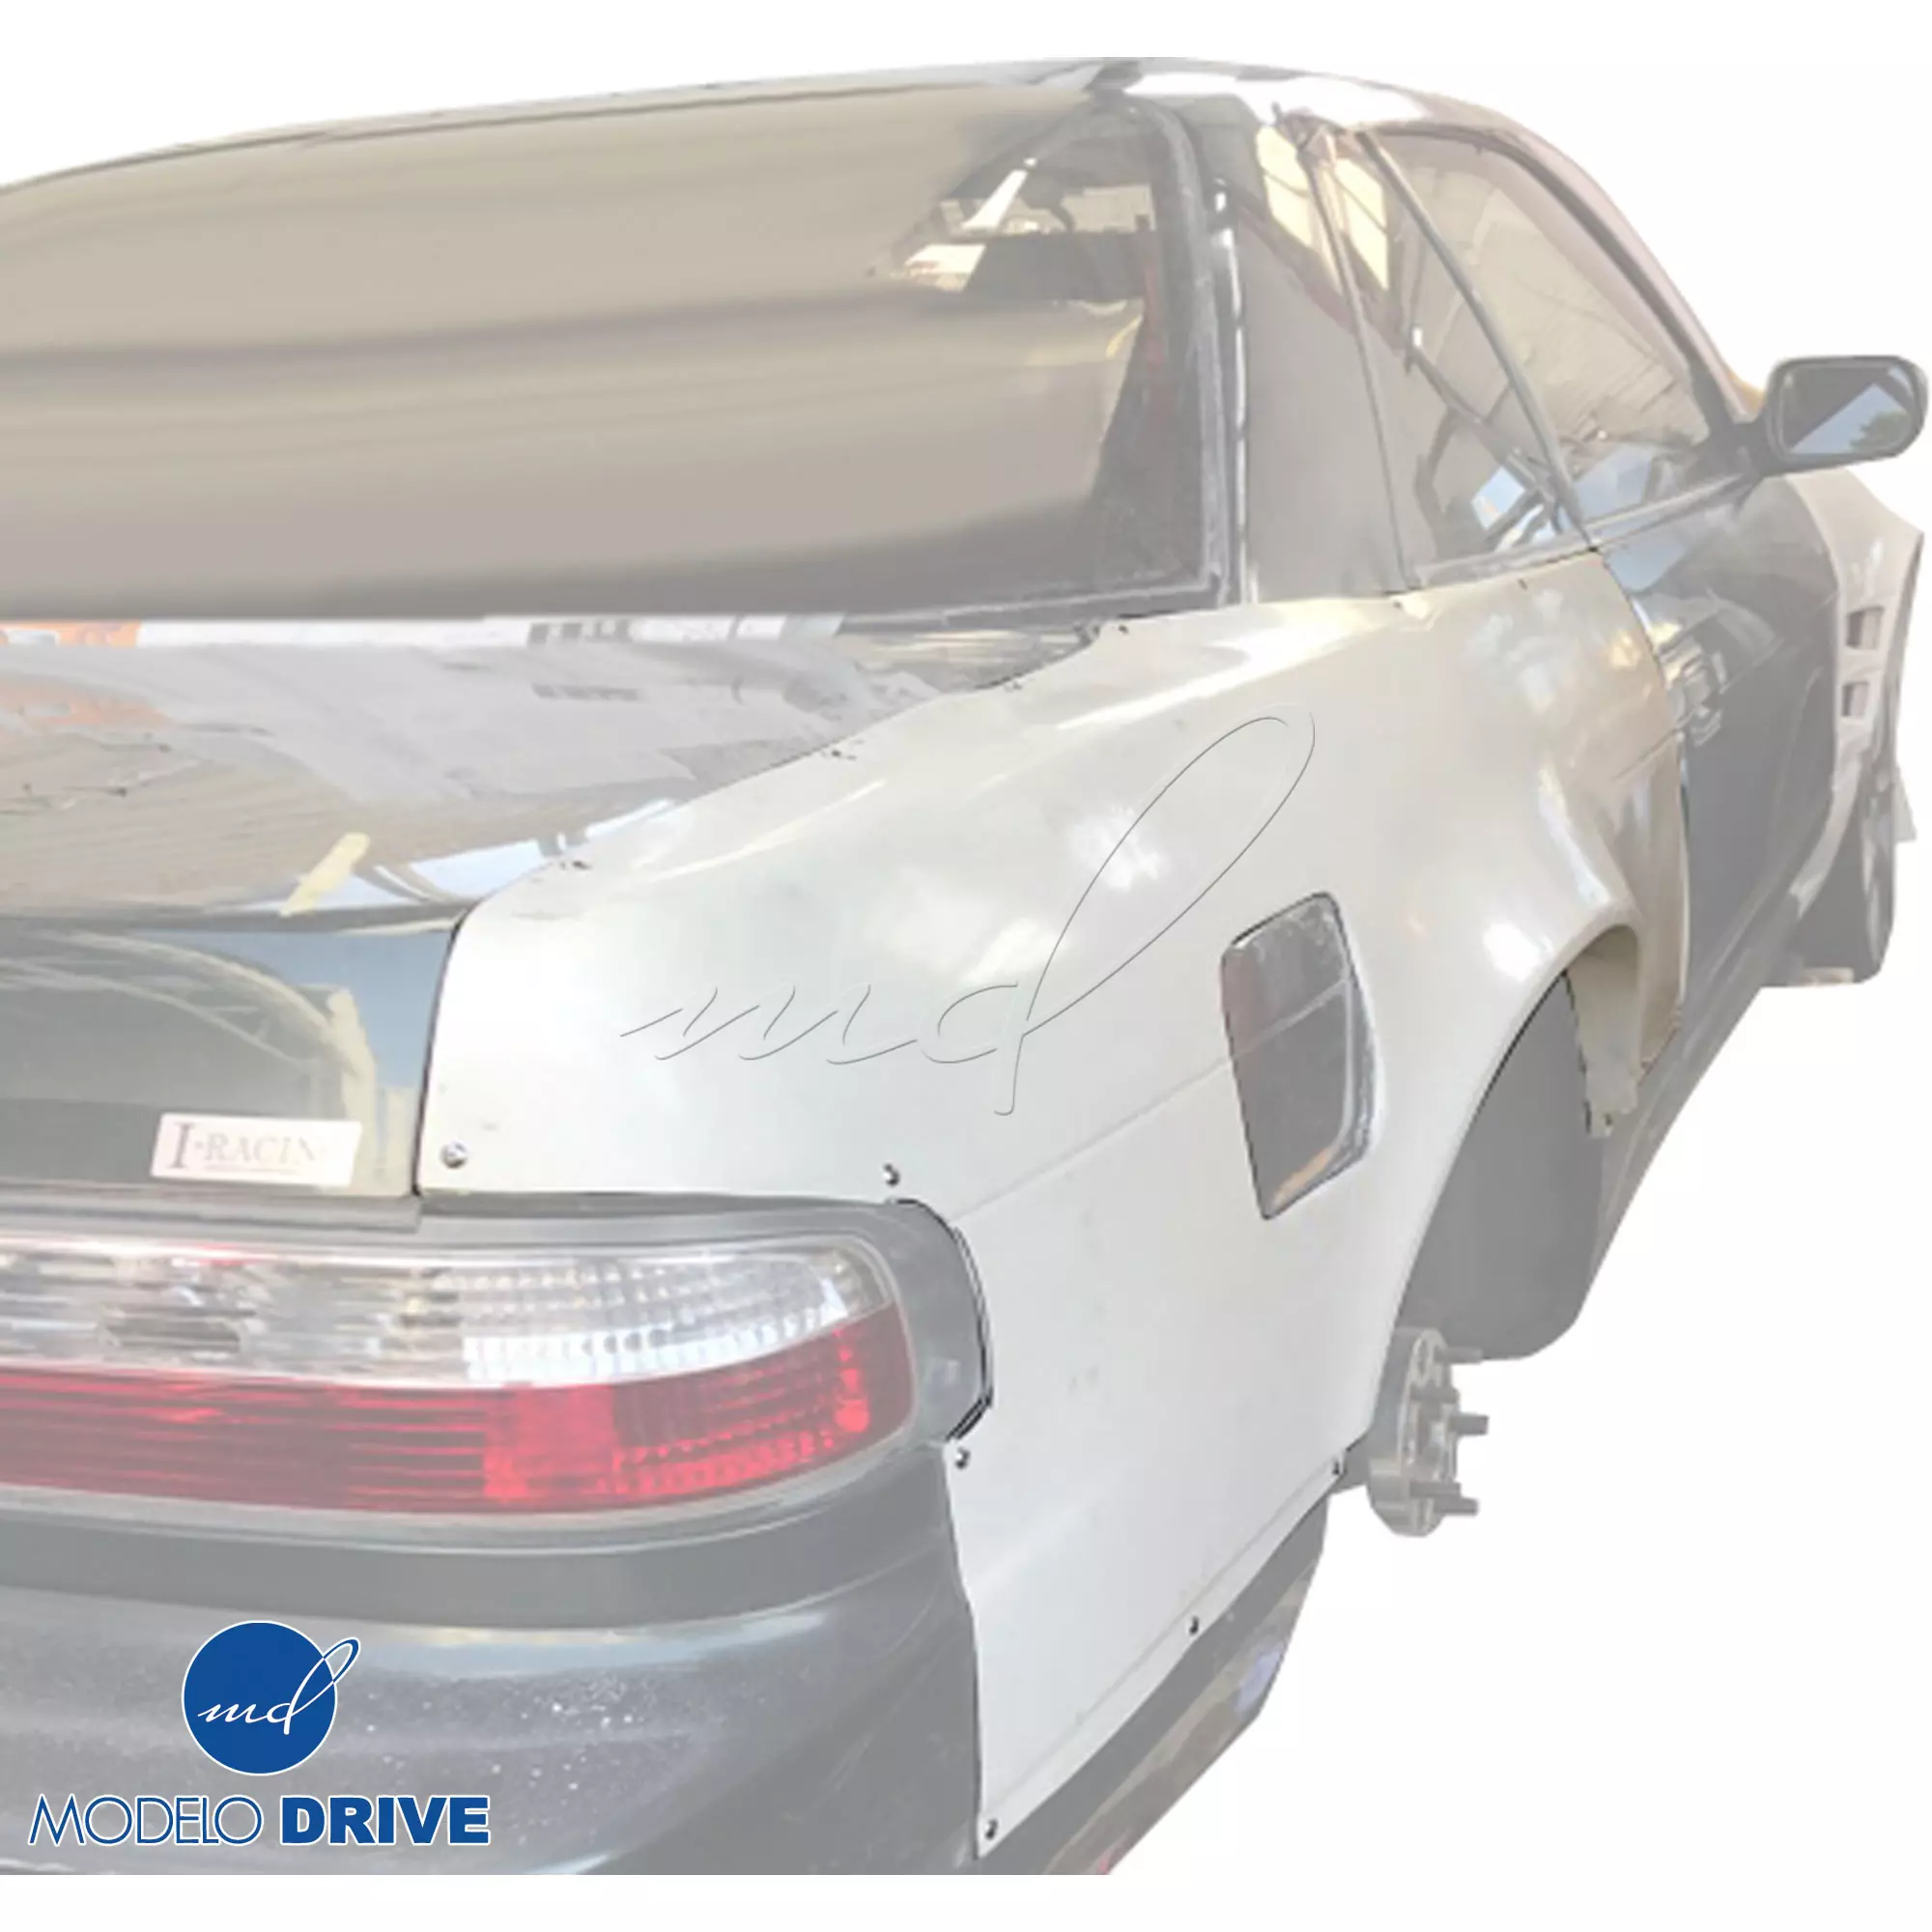 ModeloDrive FRP ORI t3 55mm Wide Body Fenders (rear) > Nissan 240SX 1989-1994 > 2dr Coupe - Image 1